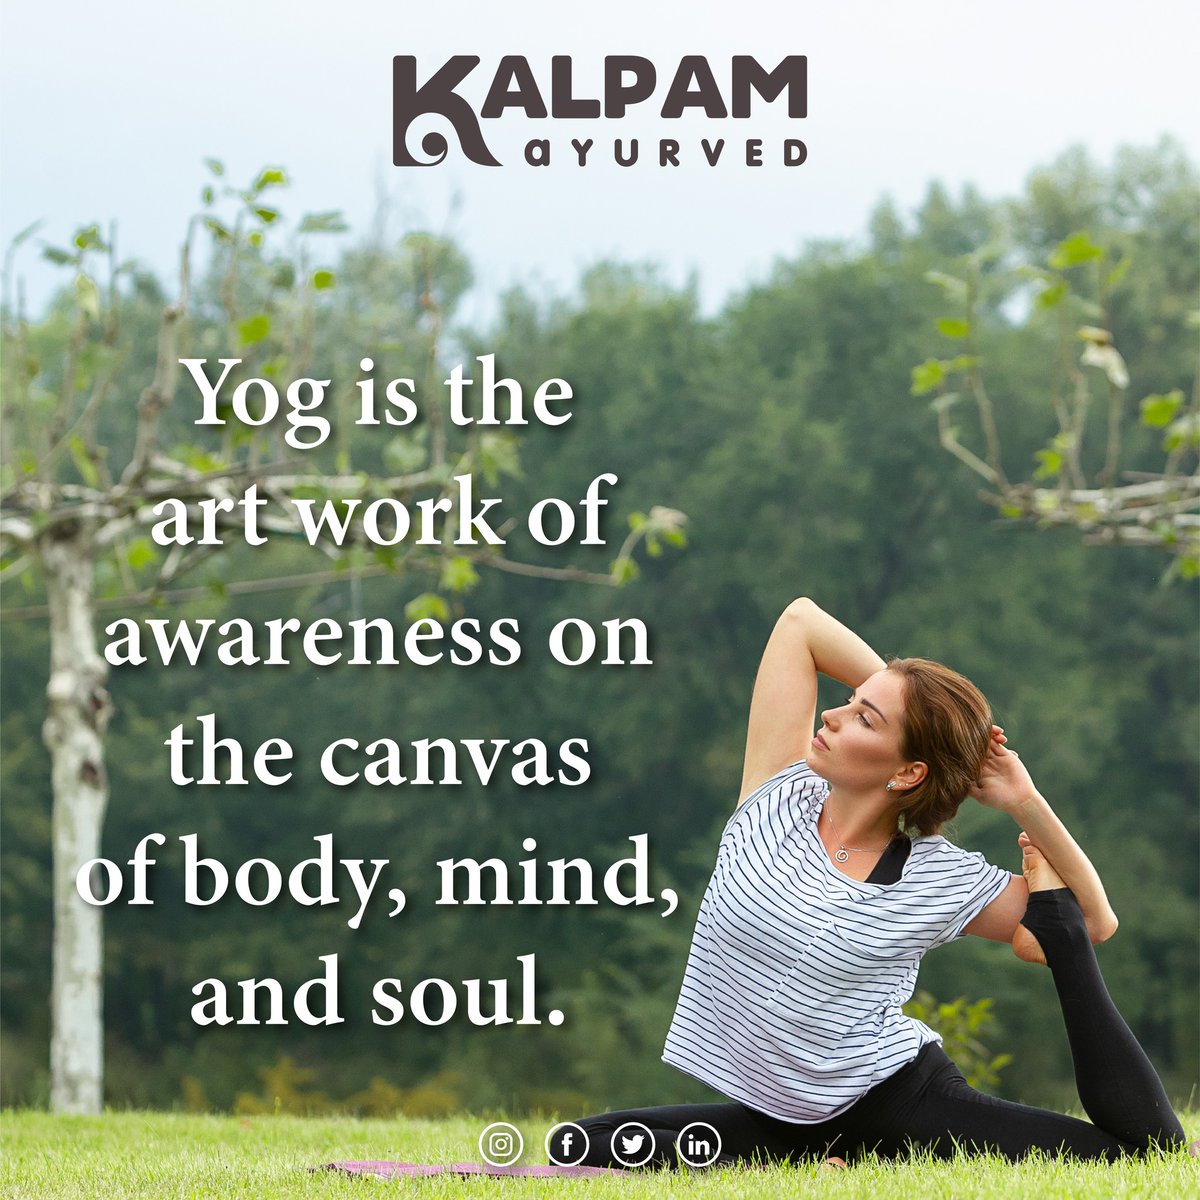 Good morning
.
#kalpamindia #kalpamayurved #yog  #ayurvedafacts #healthfacts #healthquotes #lifequotes 
.
‼️𝐂𝐨𝐩𝐲𝐫𝐢𝐠𝐡𝐭 𝐃𝐢𝐬𝐜𝐥𝐚𝐢𝐦𝐞𝐫‼️

Fair use is a use permitted by copyright statute. (𝐍𝐎 𝐂𝐎𝐏𝐘𝐑𝐈𝐆𝐇𝐓 𝐈𝐍𝐅𝐑𝐈𝐍𝐆𝐄𝐌𝐄𝐍𝐓 𝐈𝐍𝐓𝐄𝐍𝐃𝐄𝐃)